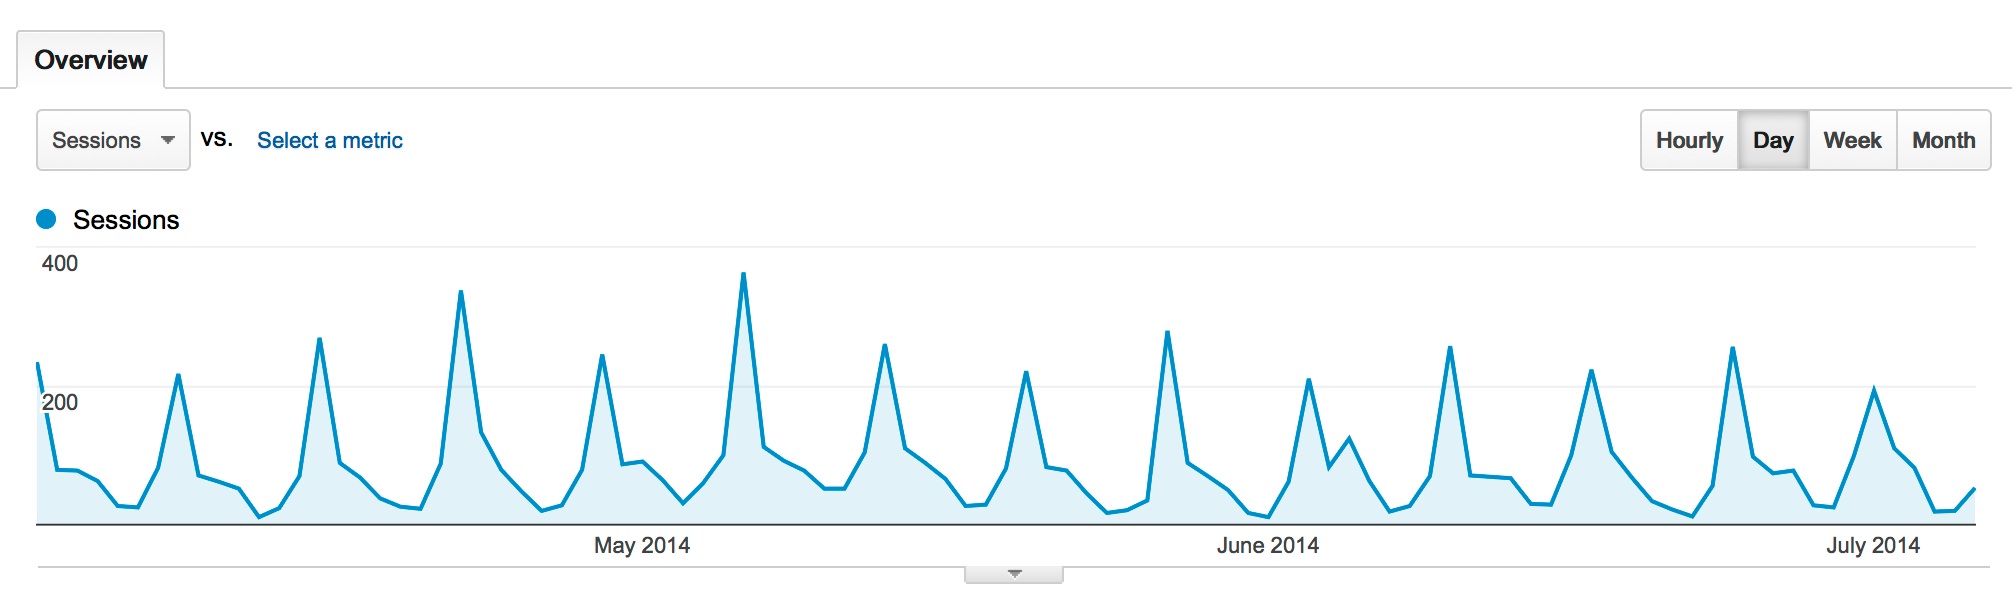 What’s driving this website traffic?